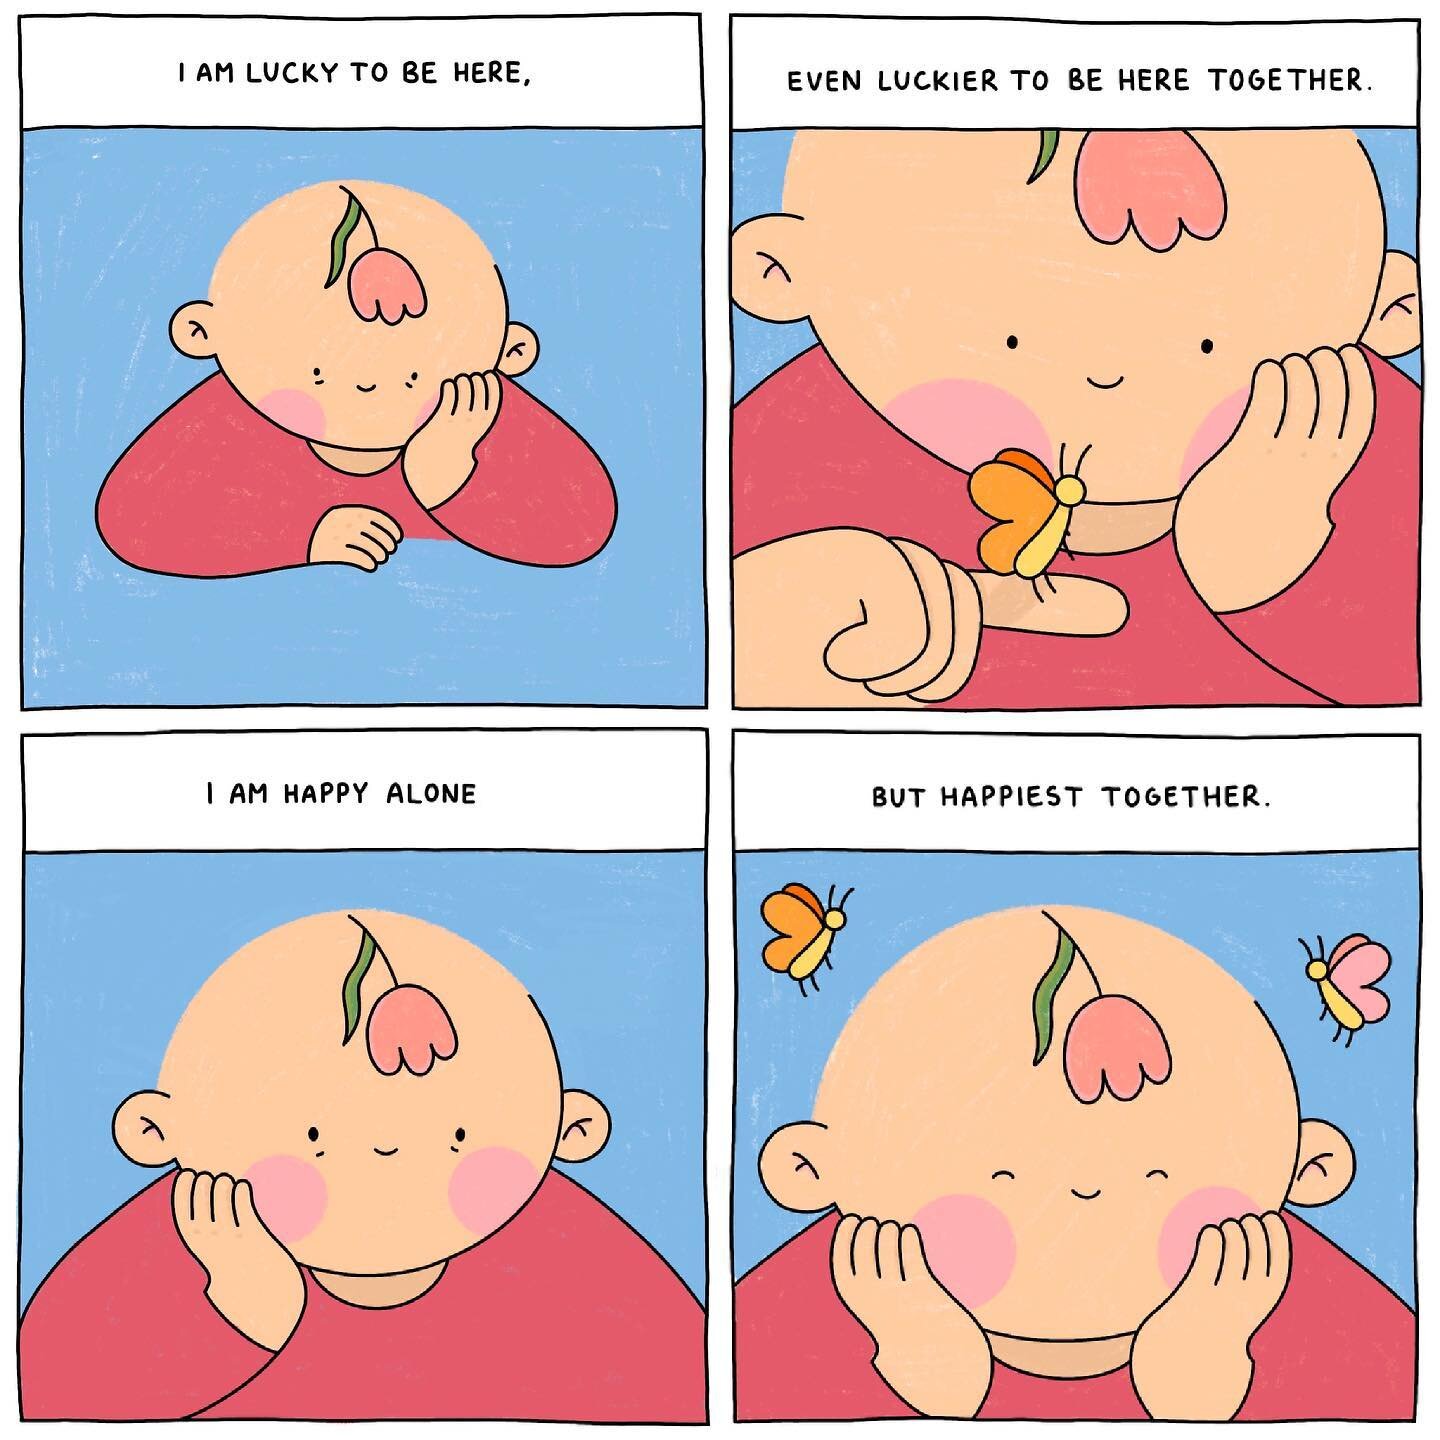 &lsquo;I am lucky to be here, even luckier to be here together. I am happy alone but happiest together&rsquo; A comic I made for my friends. If you saw me post this last night no you didn&rsquo;t 
.
.
.
#baby#comic#oc#fourpanelcomic#comicartist#illus